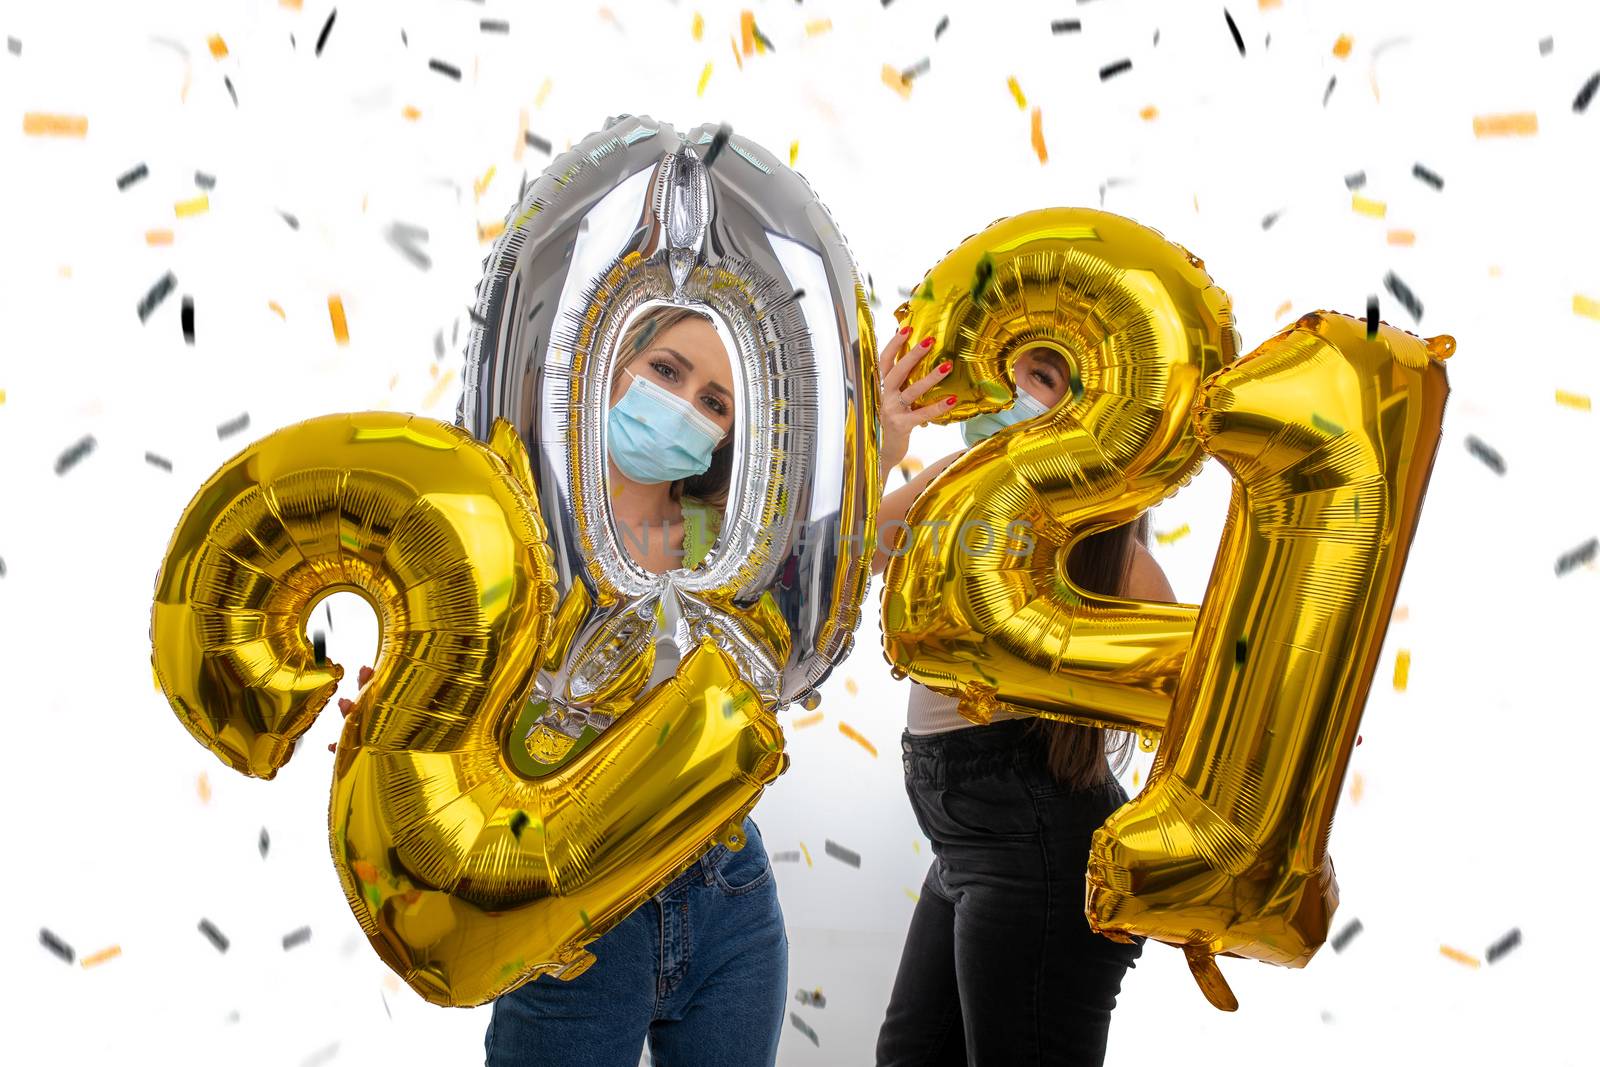 Happy girls celebrate the New Year 2021 with face masks by adamr